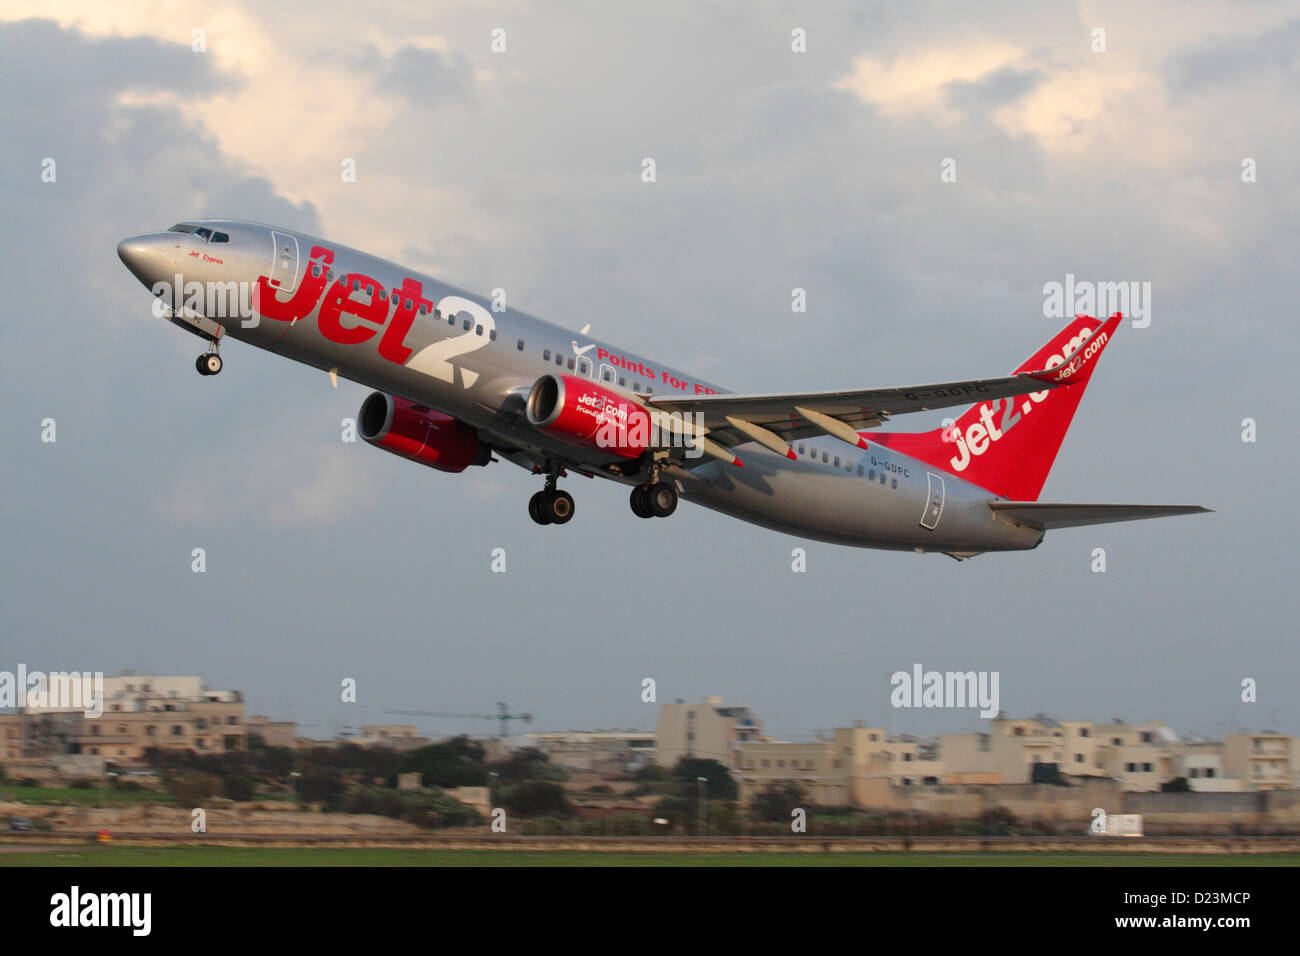 Low cost air travel. Boeing 737-800 jet plane belonging to British budget airline Jet2 taking off on a flight from Malta Stock Photo